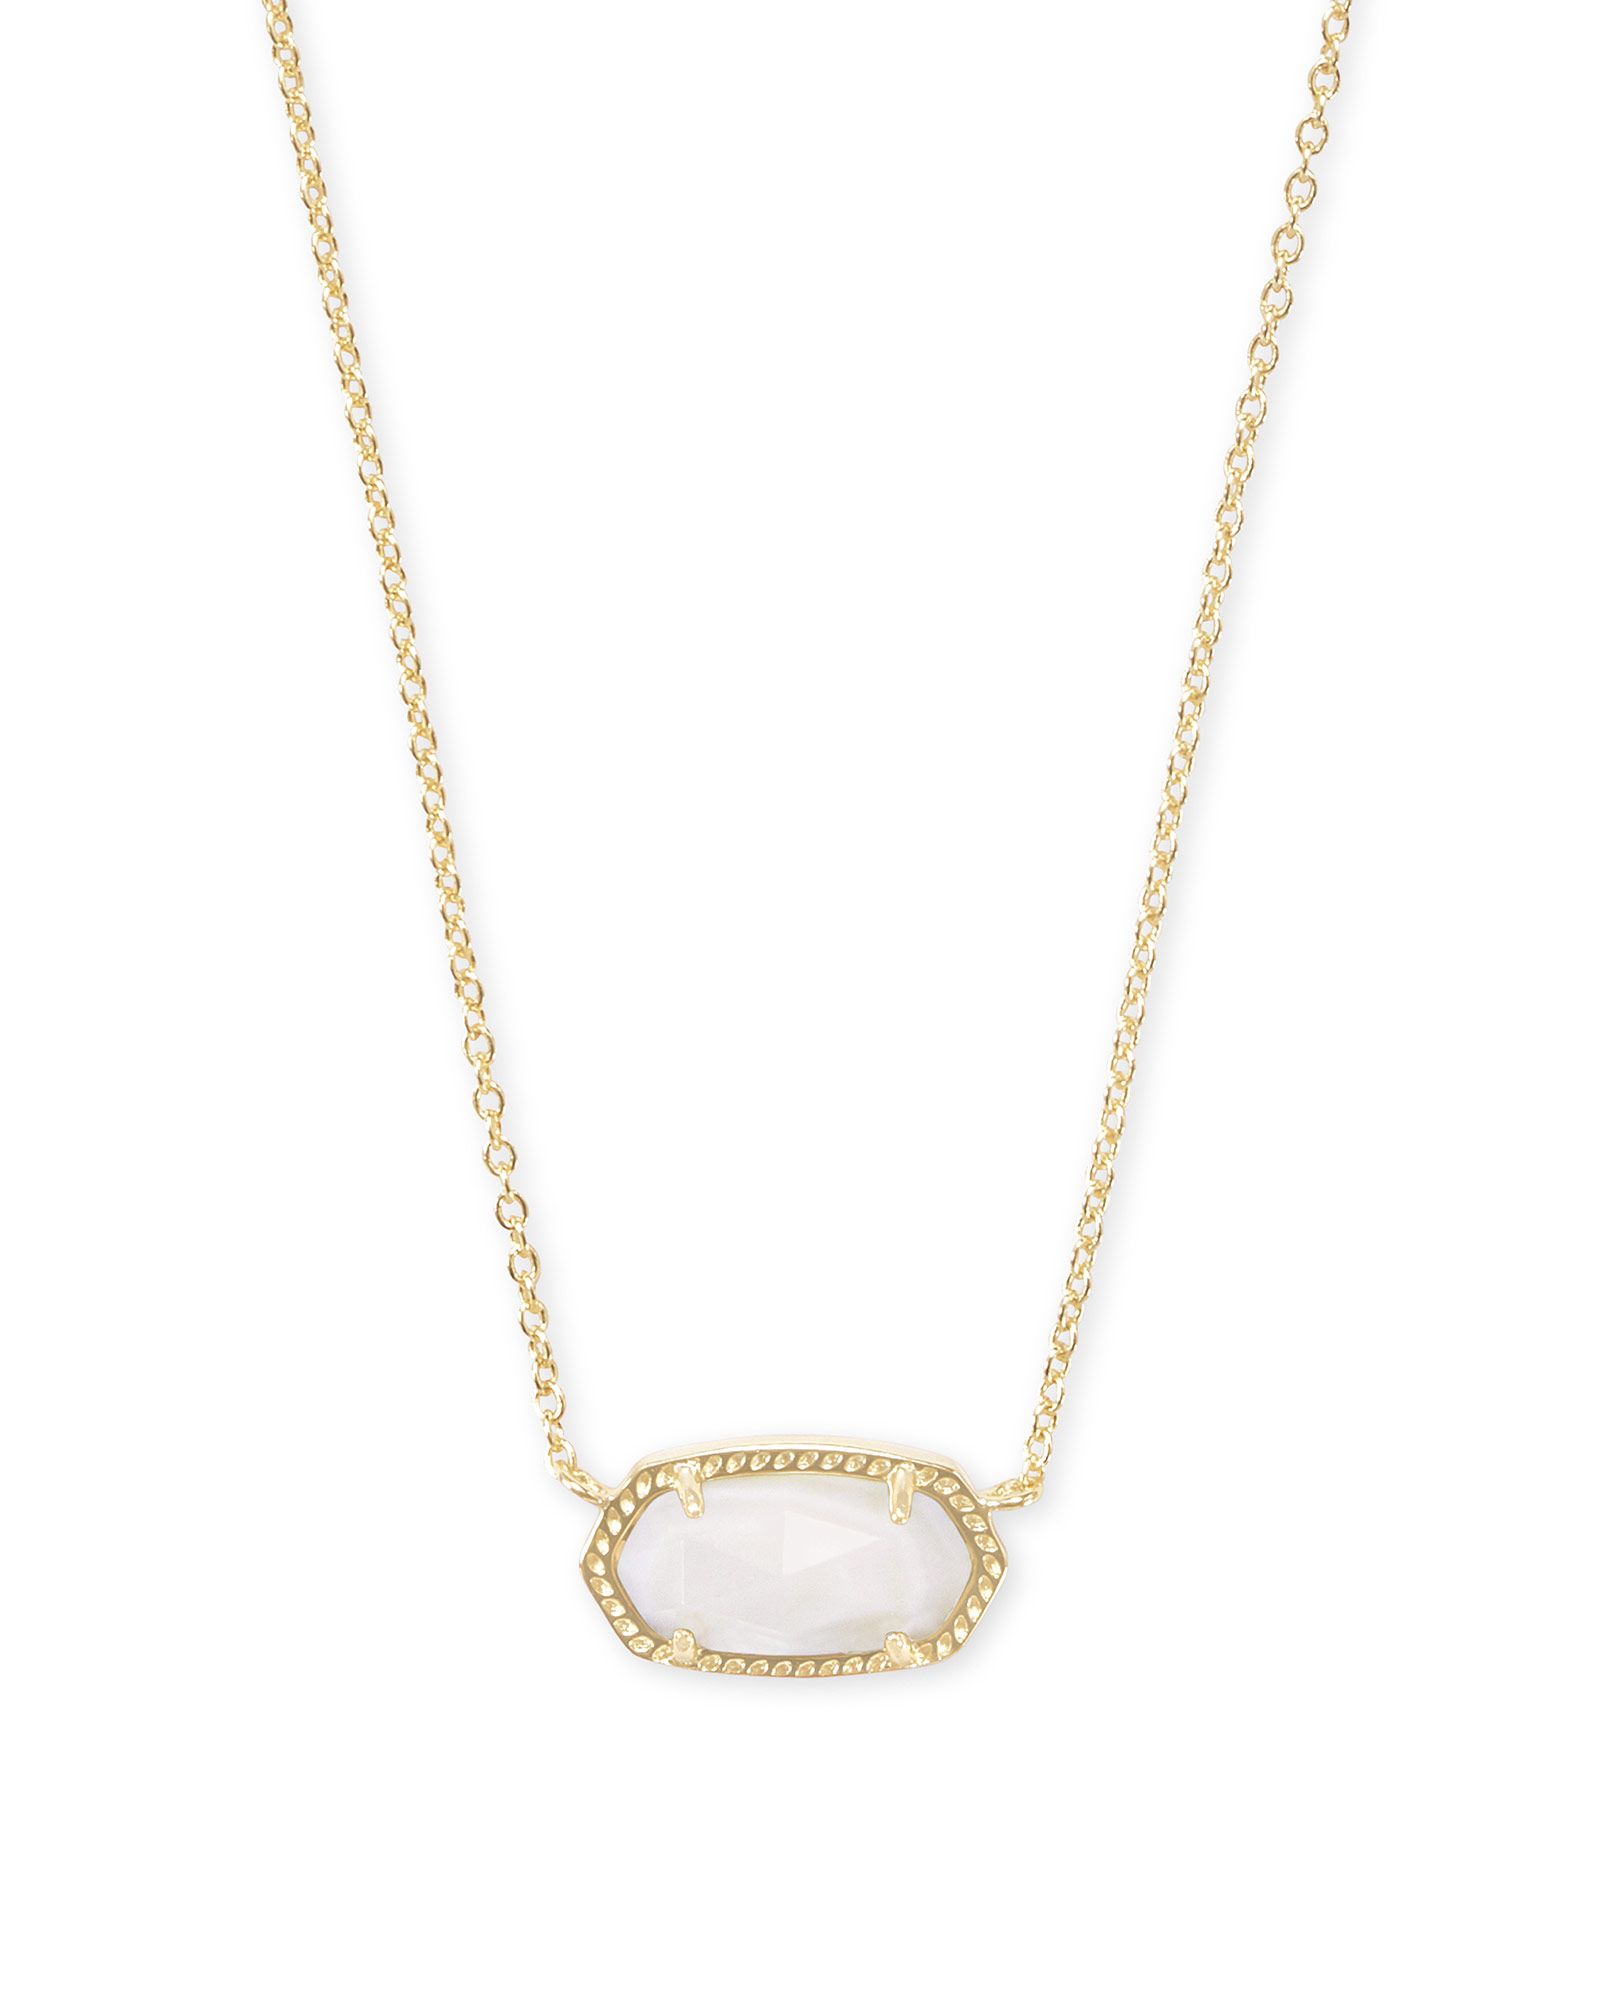 Elisa Gold Pendant Necklace in White Mother-of-Pearl | Kendra Scott